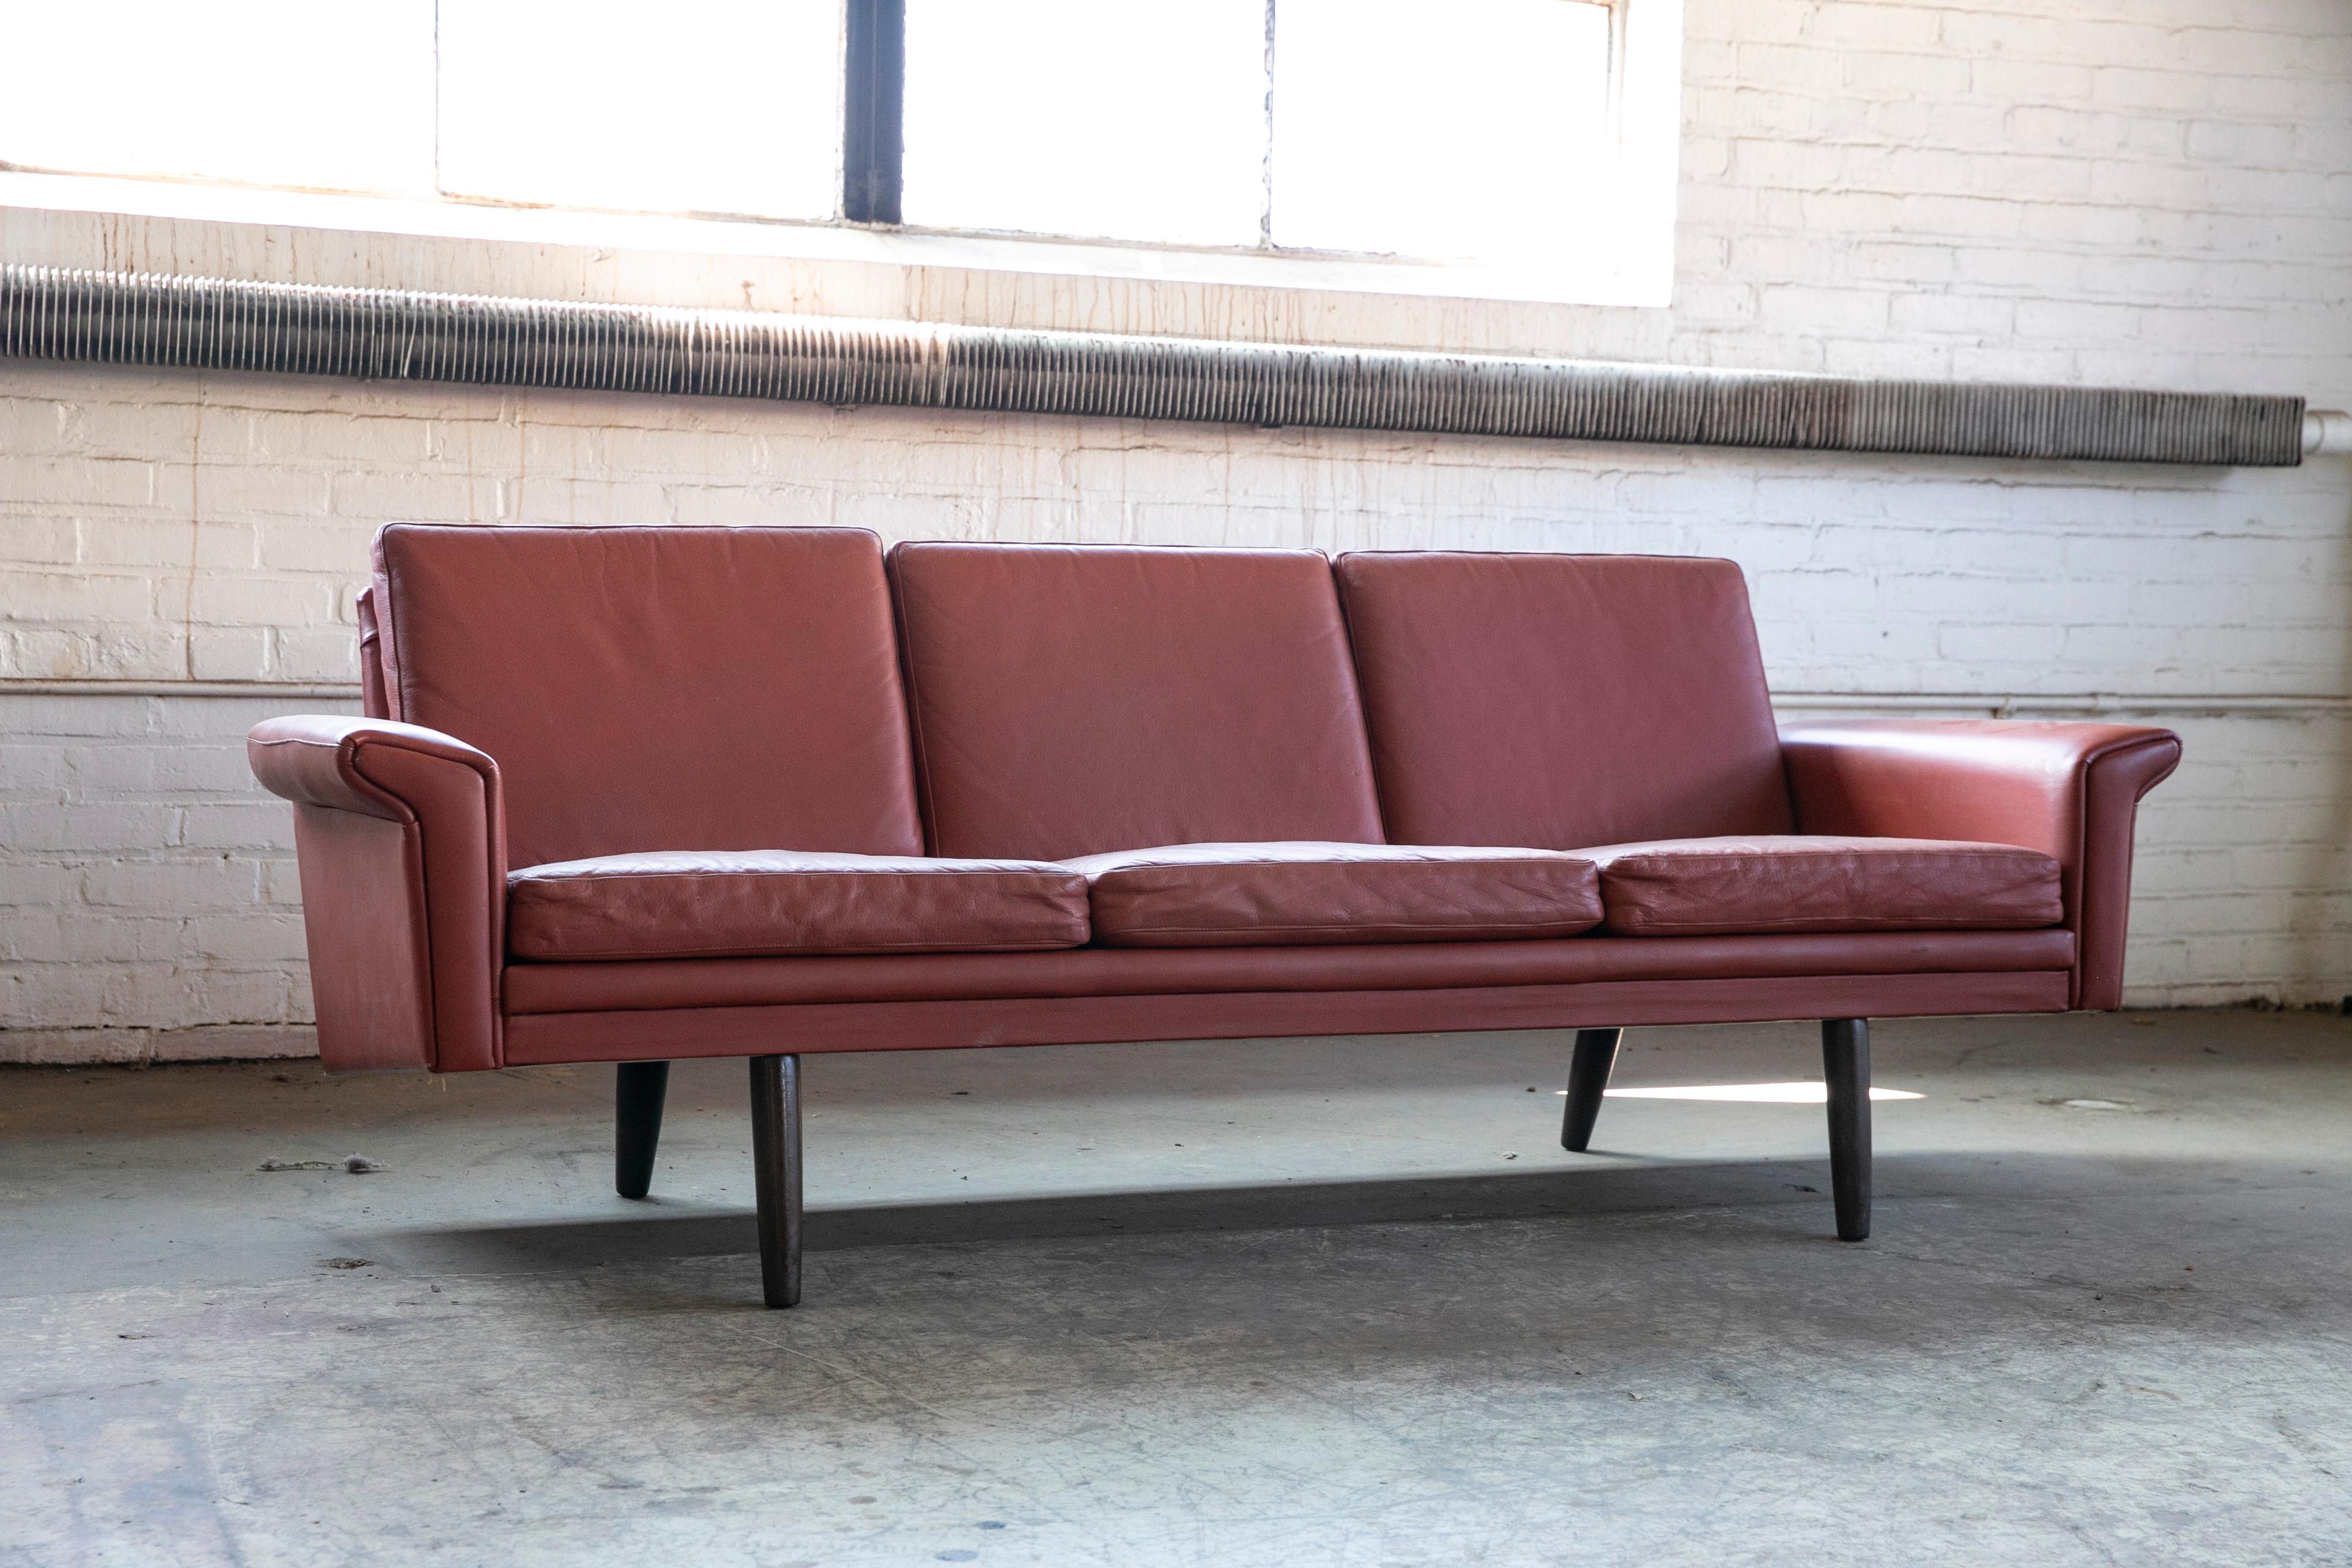 rust color couch